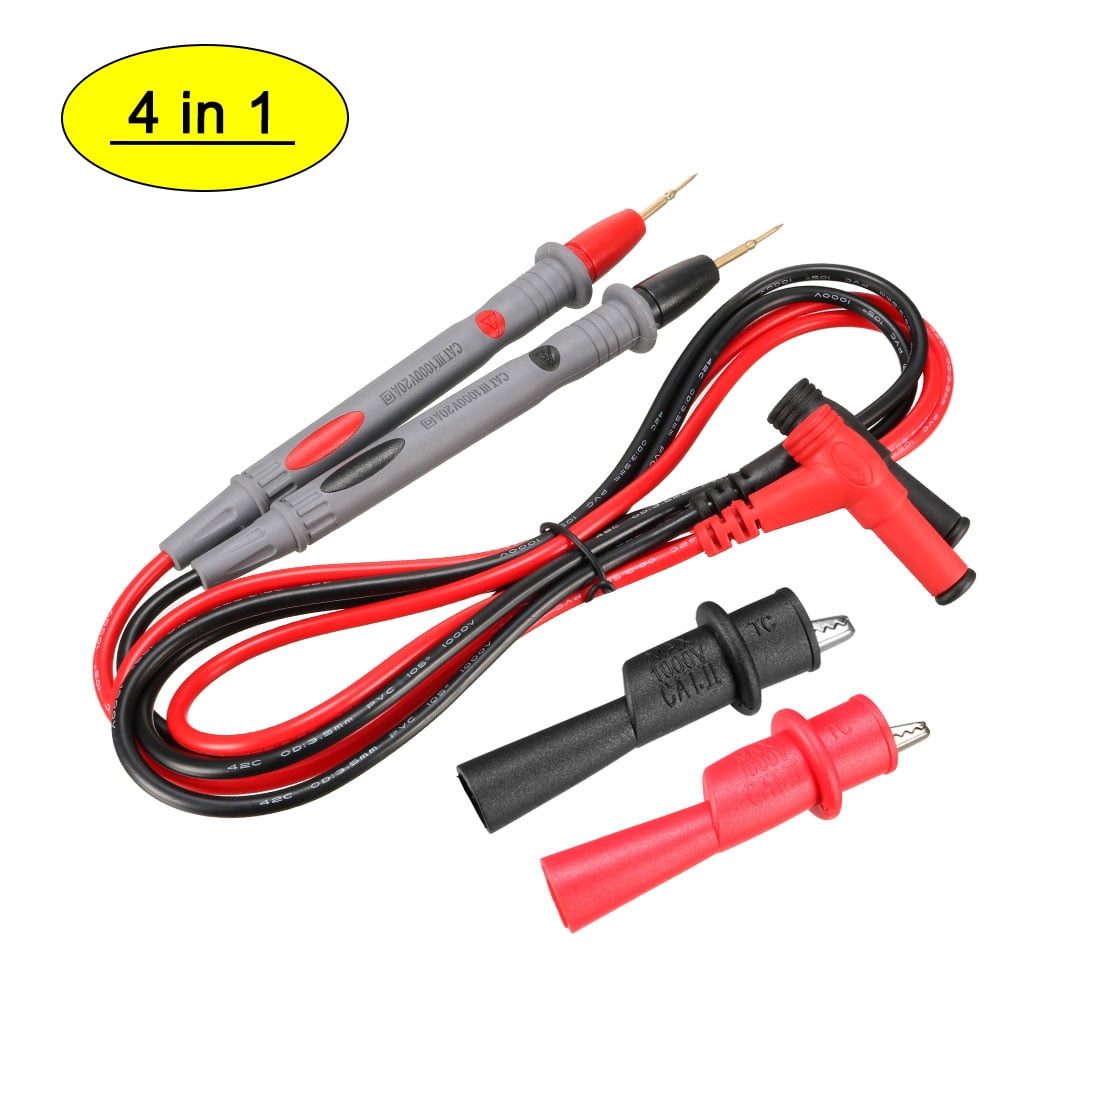 2Pcs Universal Probe Test Leads Cable For Digital Multimeter Meter 1000V 10A AD 